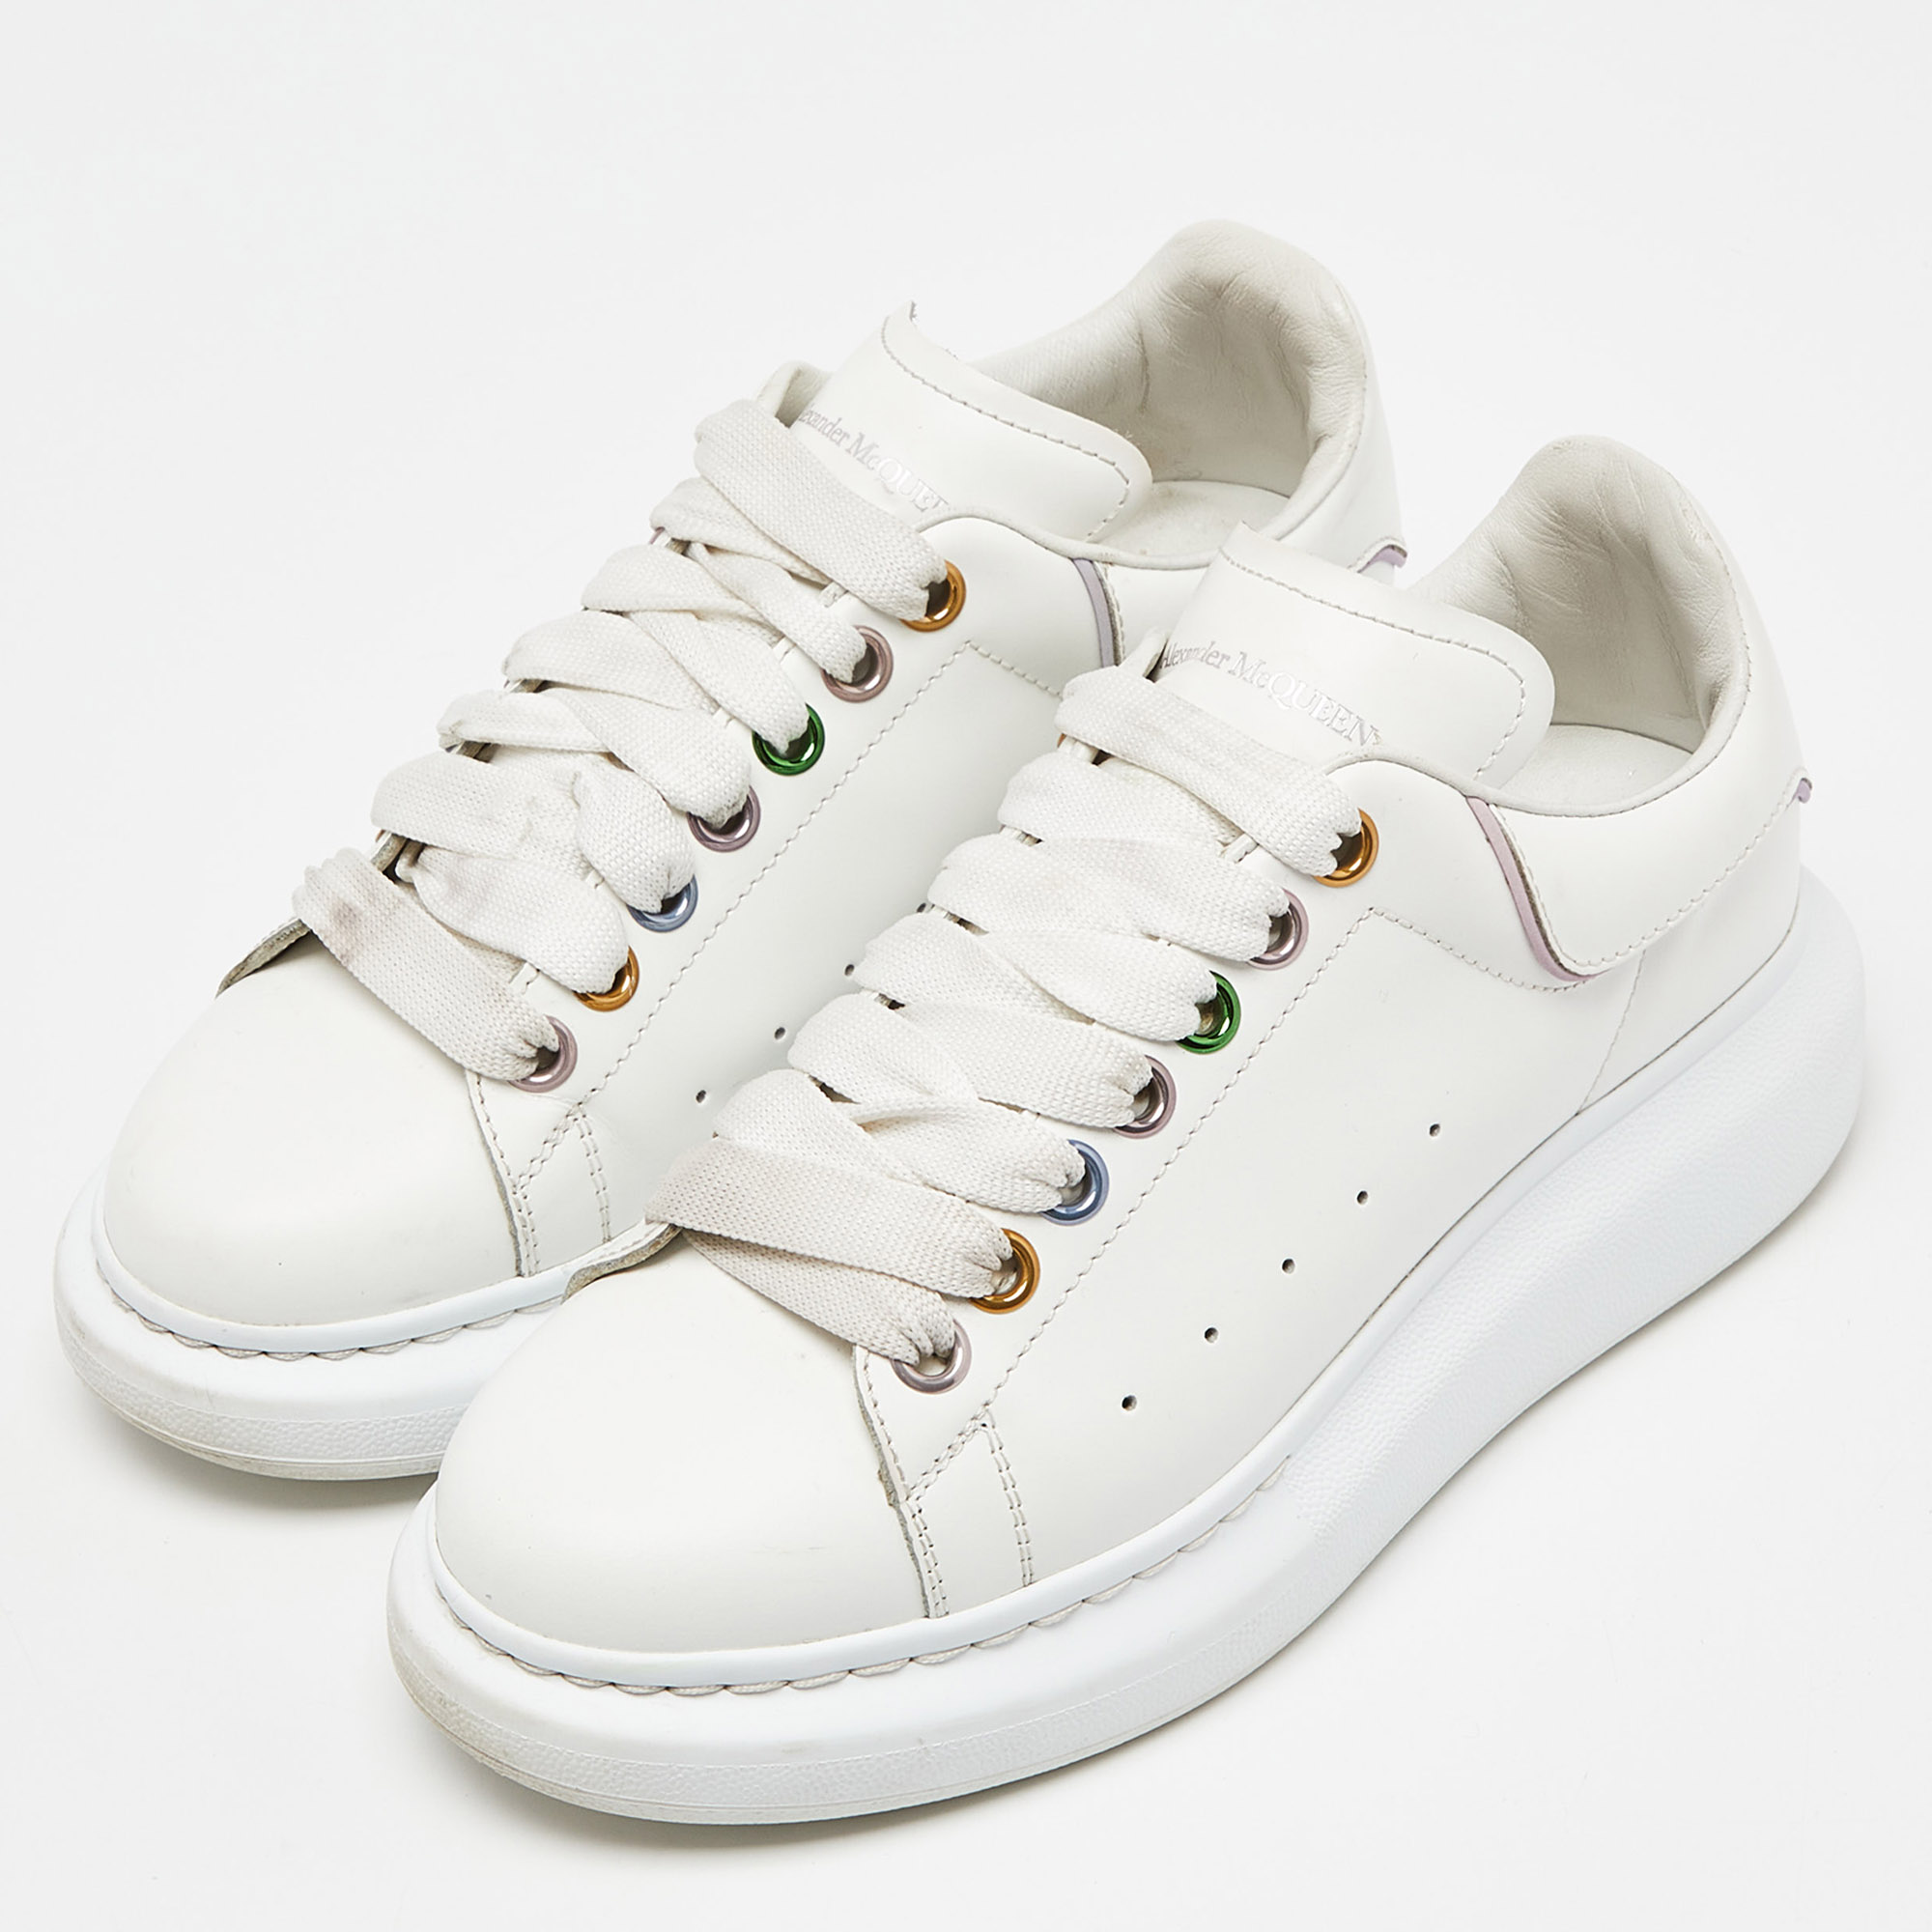 

Alexander McQueen White Leather And Suede Oversized Sneakers Size